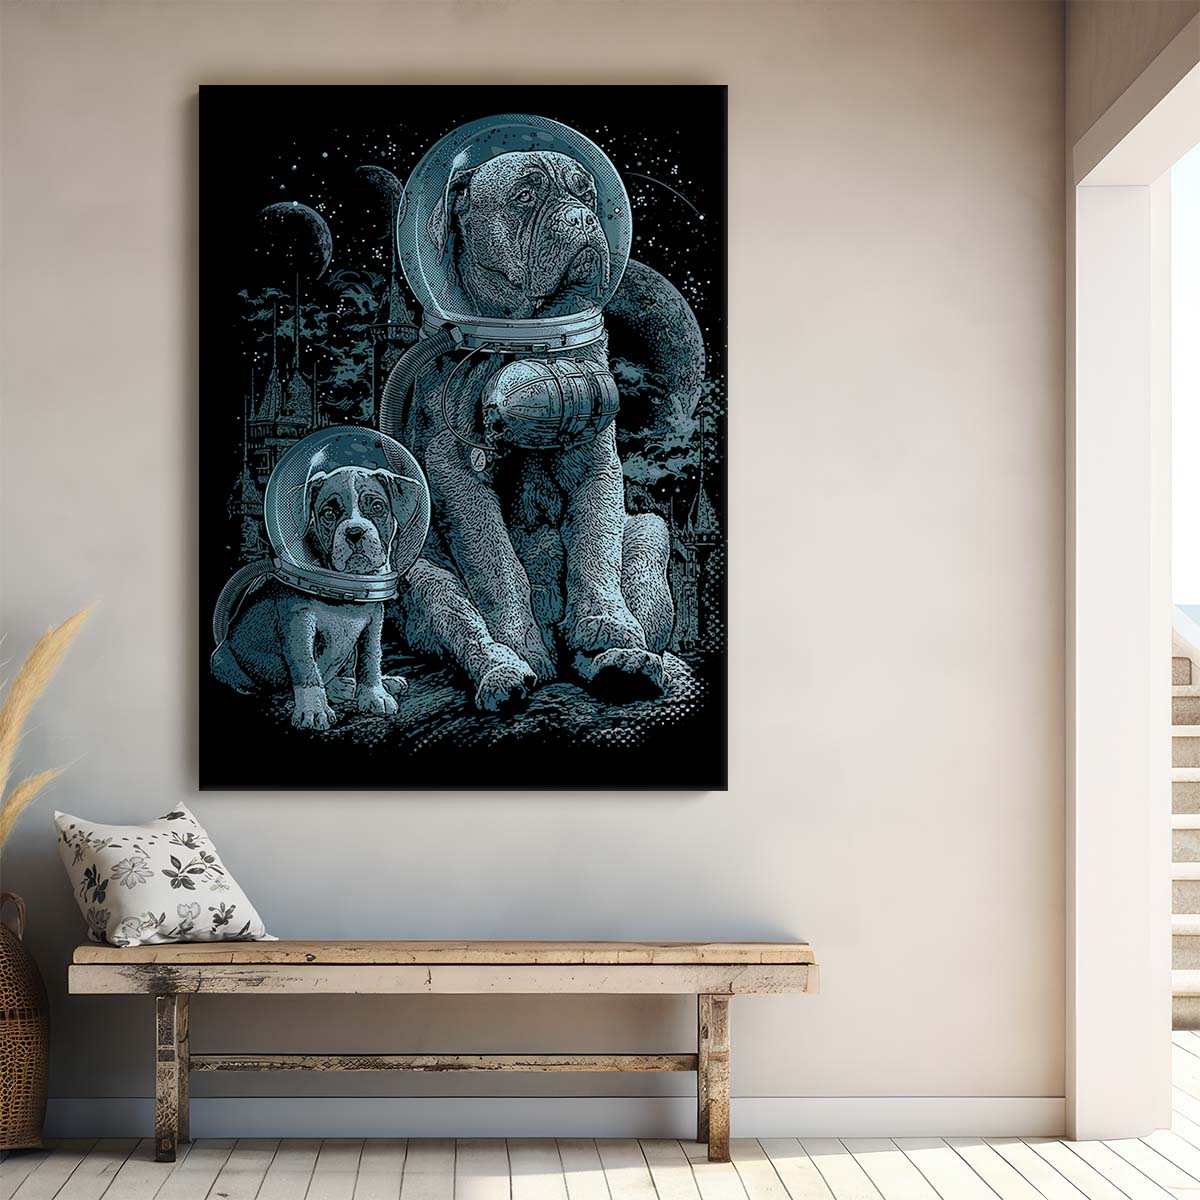 Monochrome Astronaut Dogs and Cats Space Illustration Wall Art by Luxuriance Designs, made in USA